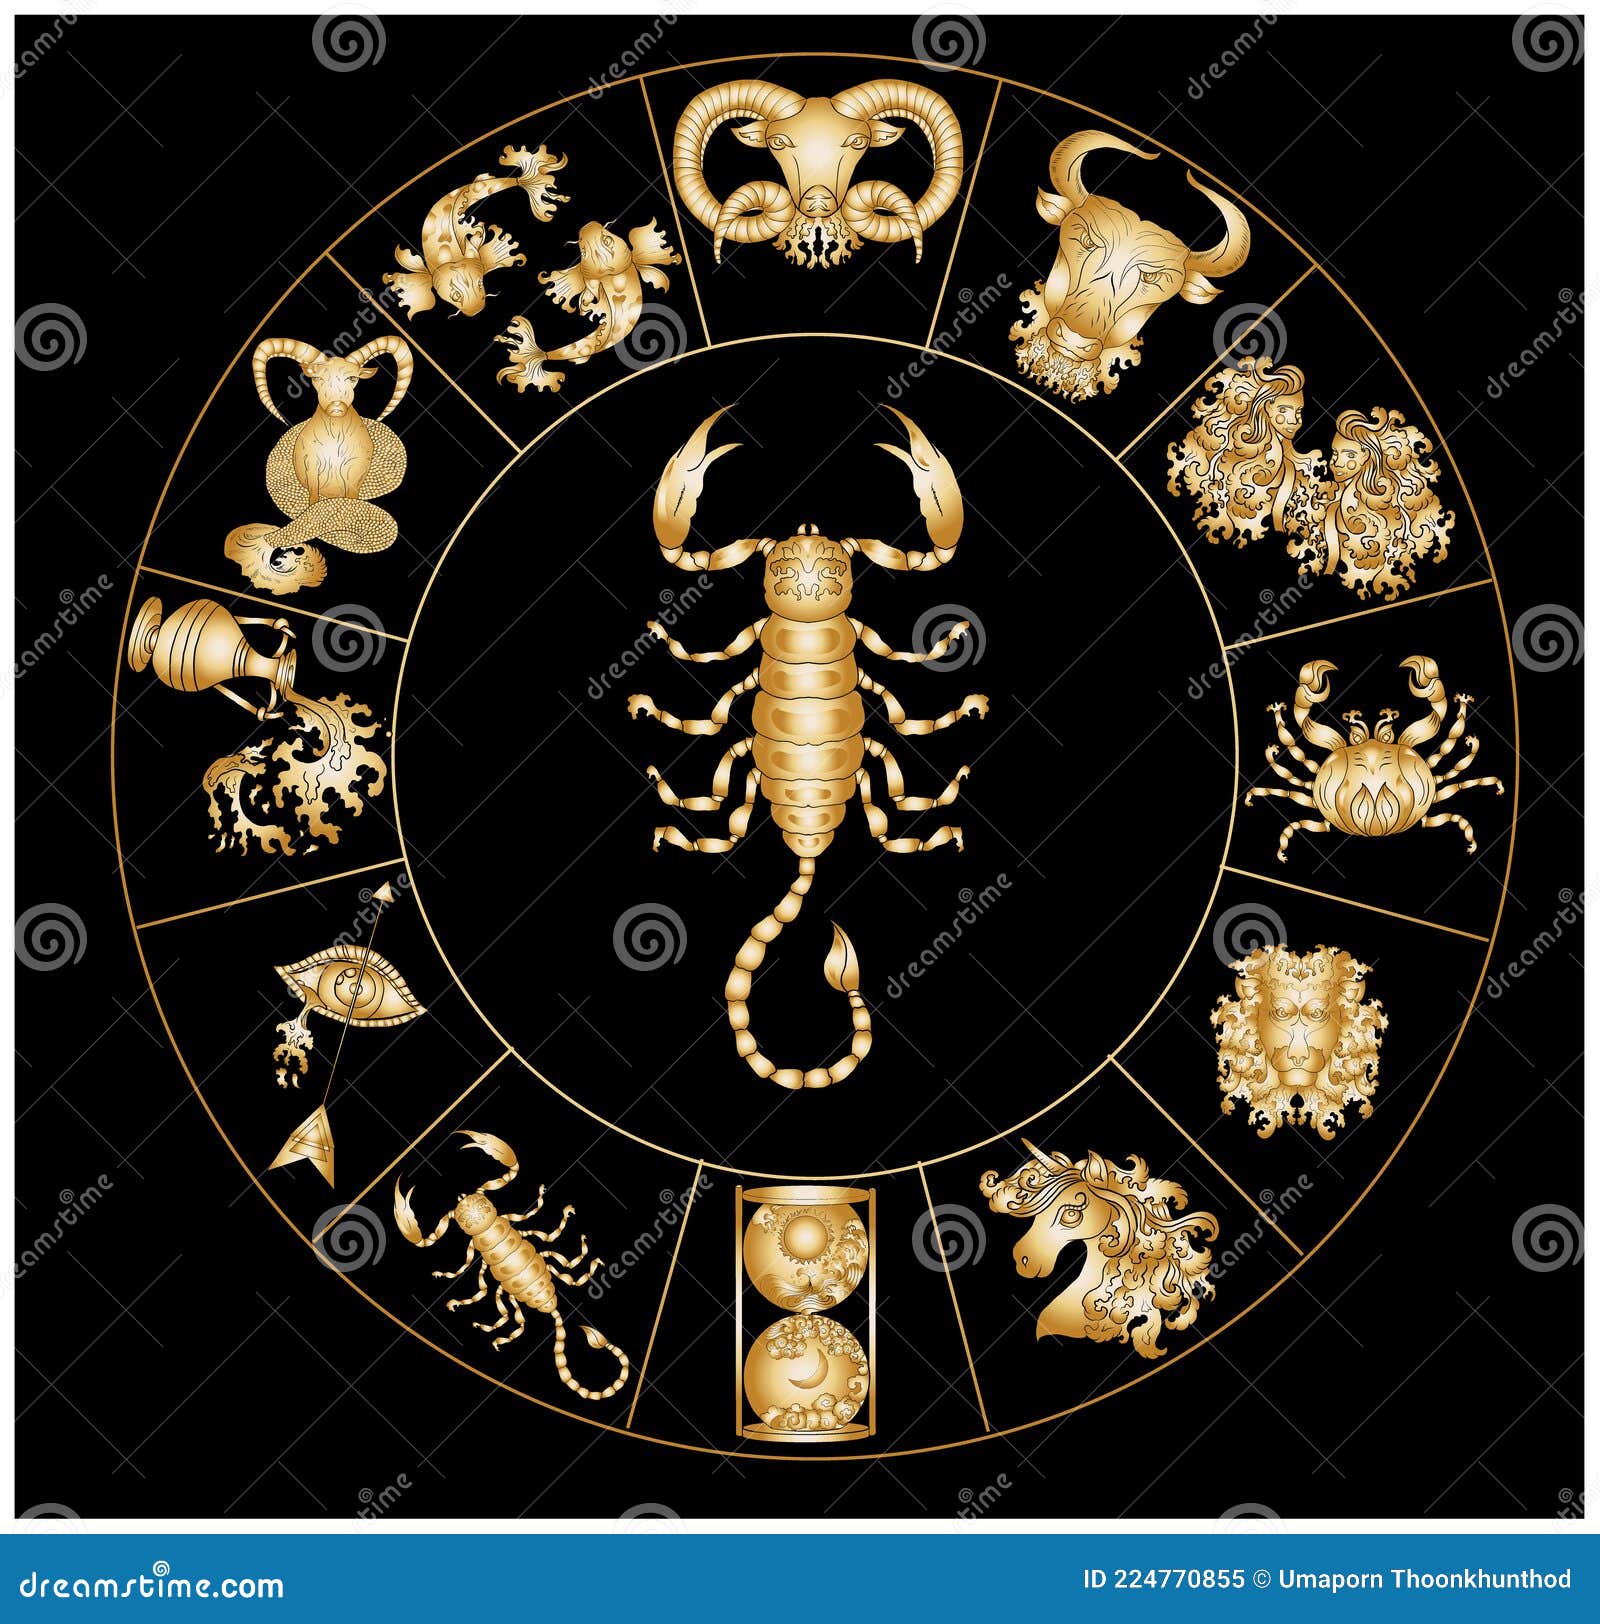 Scorpio on Circle Vector of Astrology  Illustration for  Doodle Art. Stock Vector - Illustration of frame, circle: 224770855